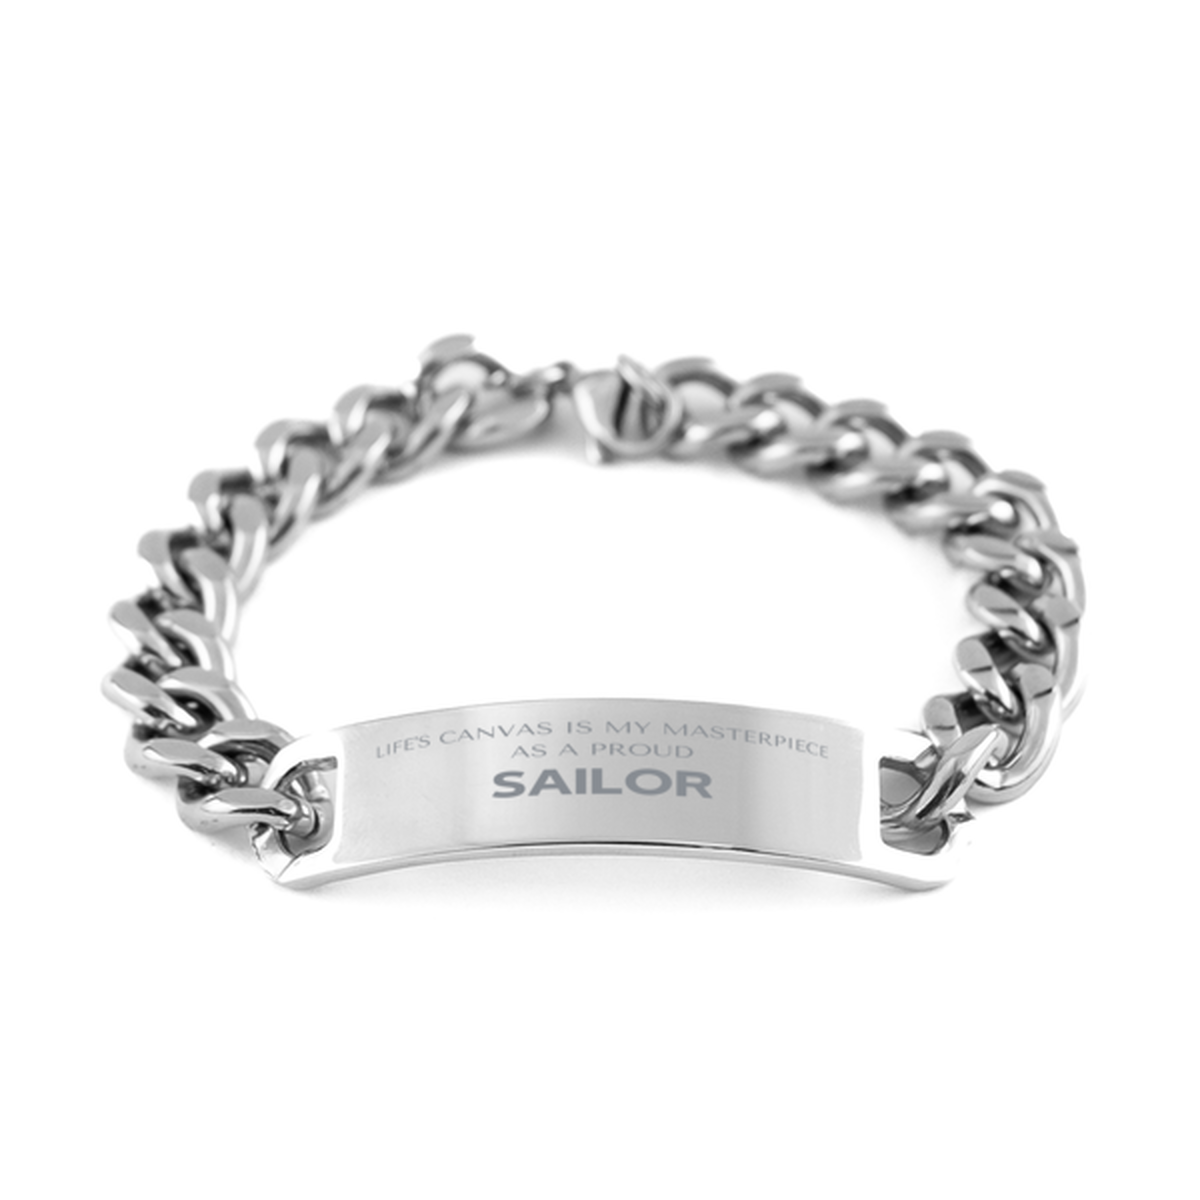 Proud Sailor Gifts, Life's canvas is my masterpiece, Epic Birthday Christmas Unique Cuban Chain Stainless Steel Bracelet For Sailor, Coworkers, Men, Women, Friends